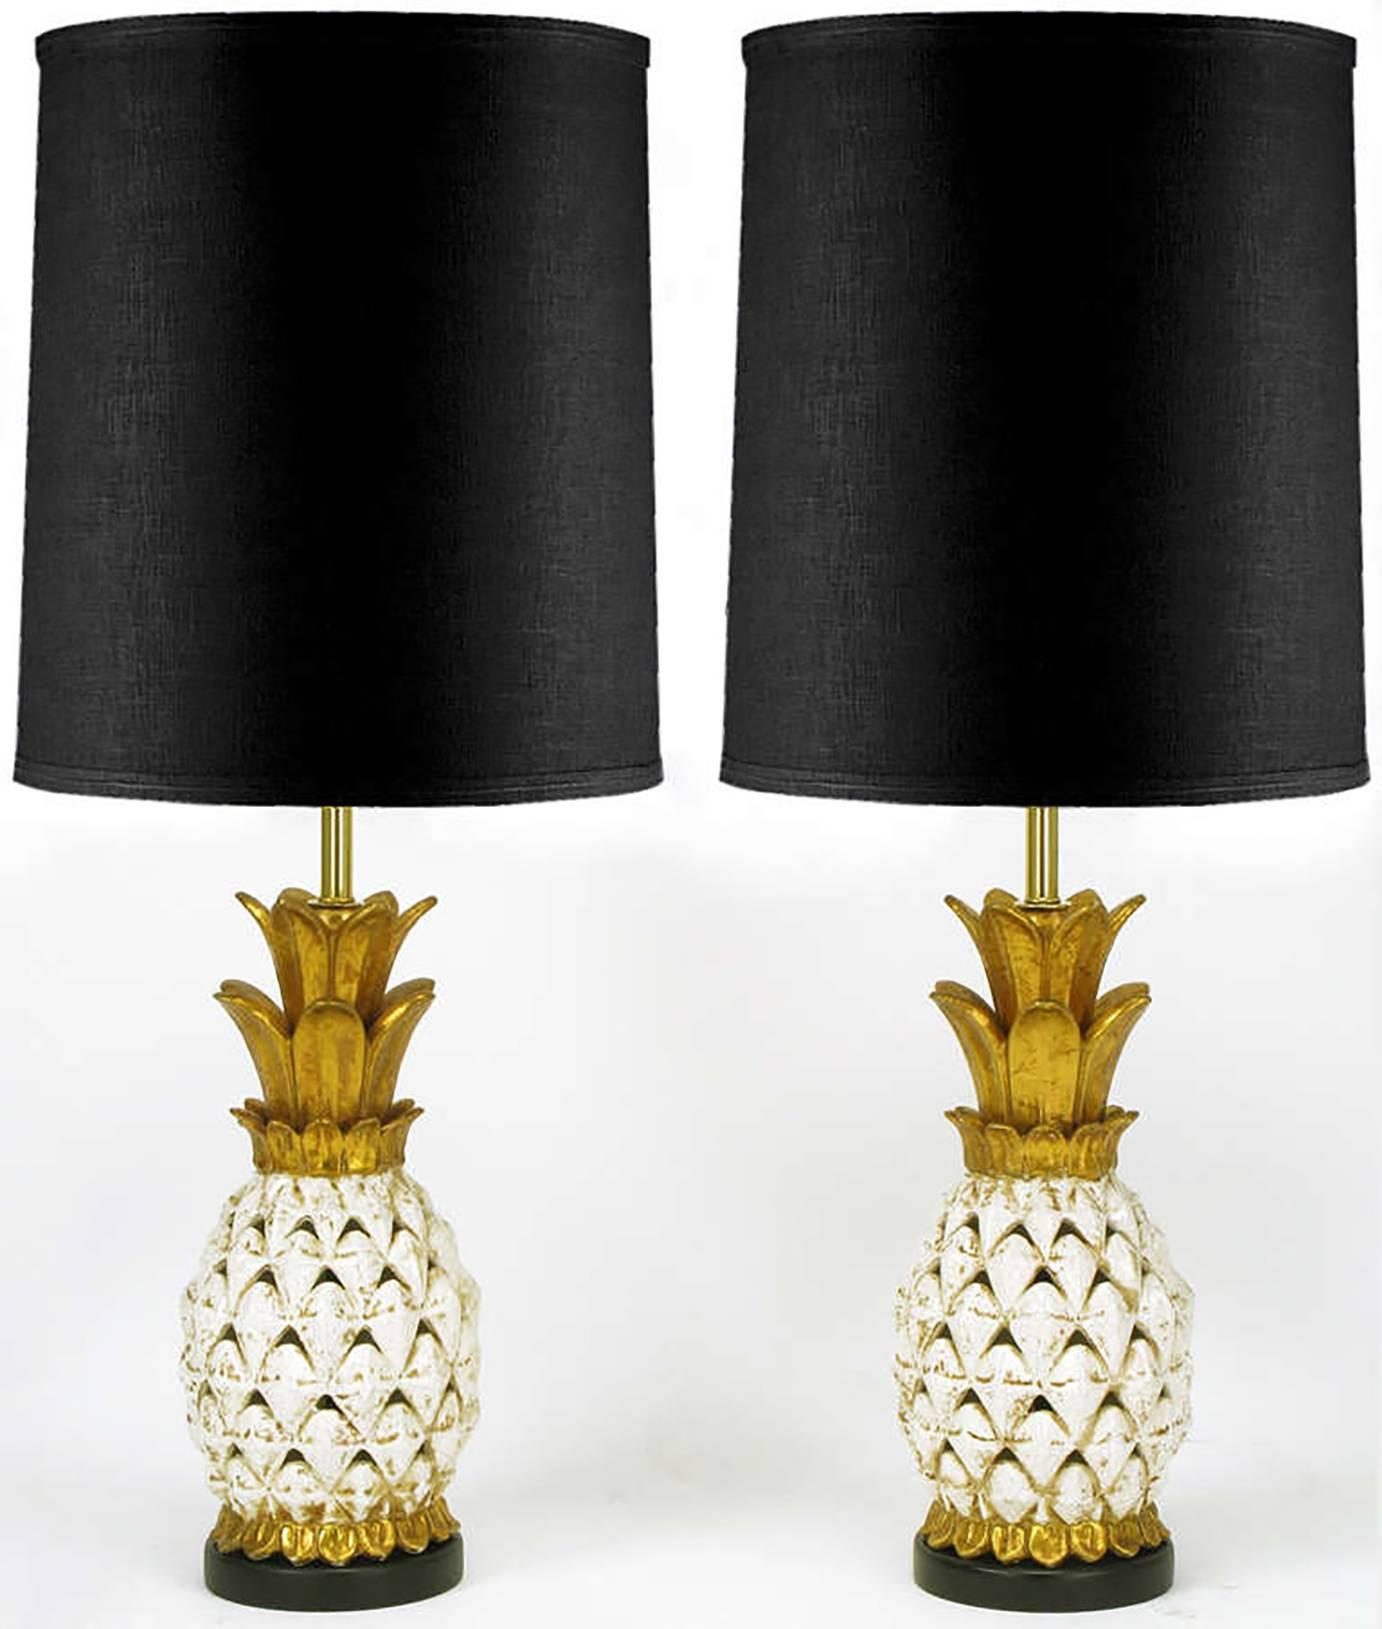 Pair of pierced ceramic body table lamps in the shape of white glazed and parcel-gilt pineapples with gilt crown. Black lacquered wood base, brass stems, and double sockets with ball end pull chain.